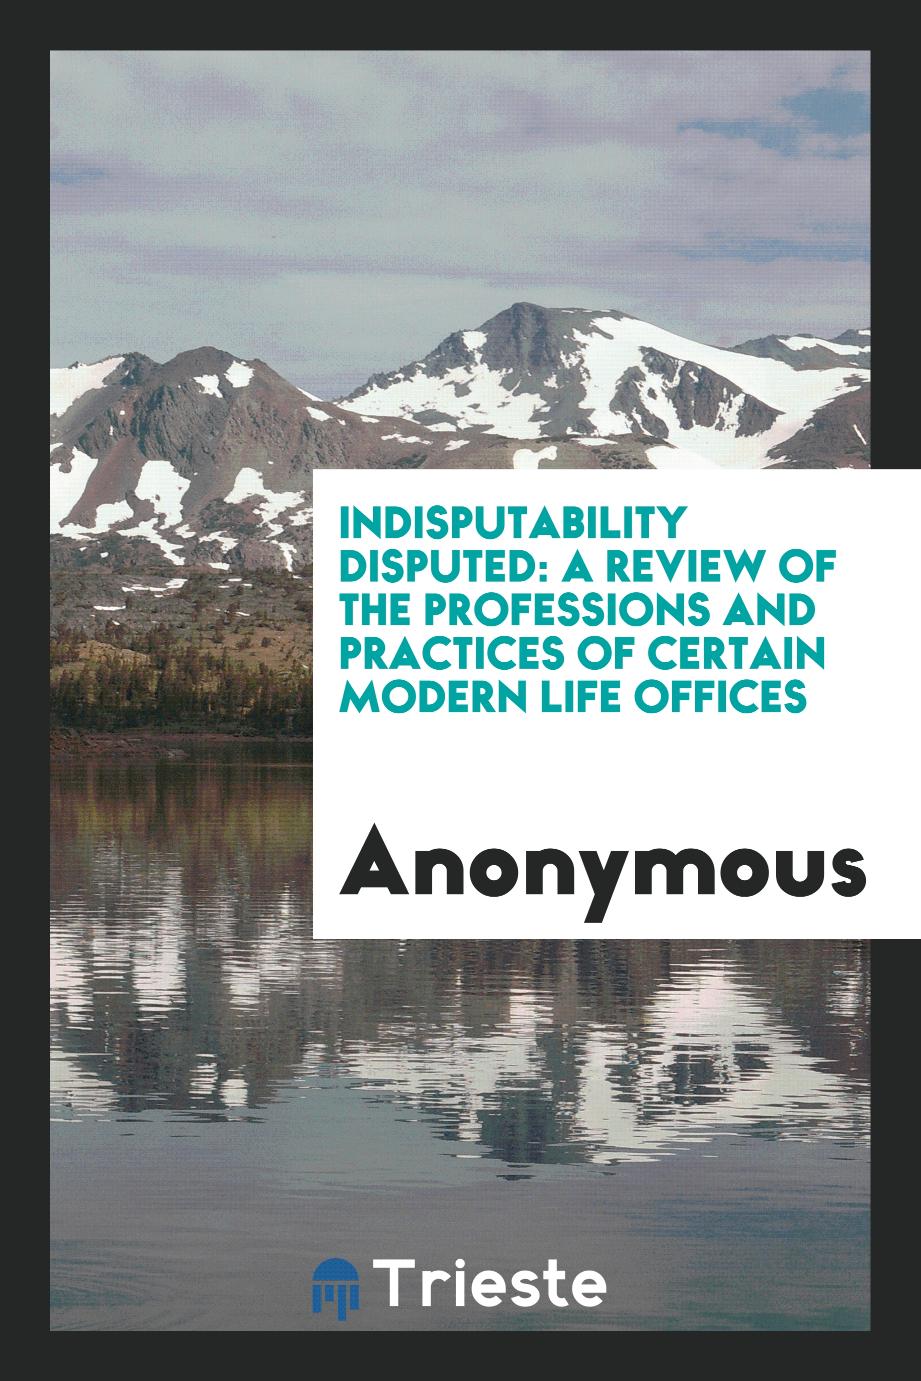 Indisputability disputed: a review of the professions and practices of certain modern life Offices